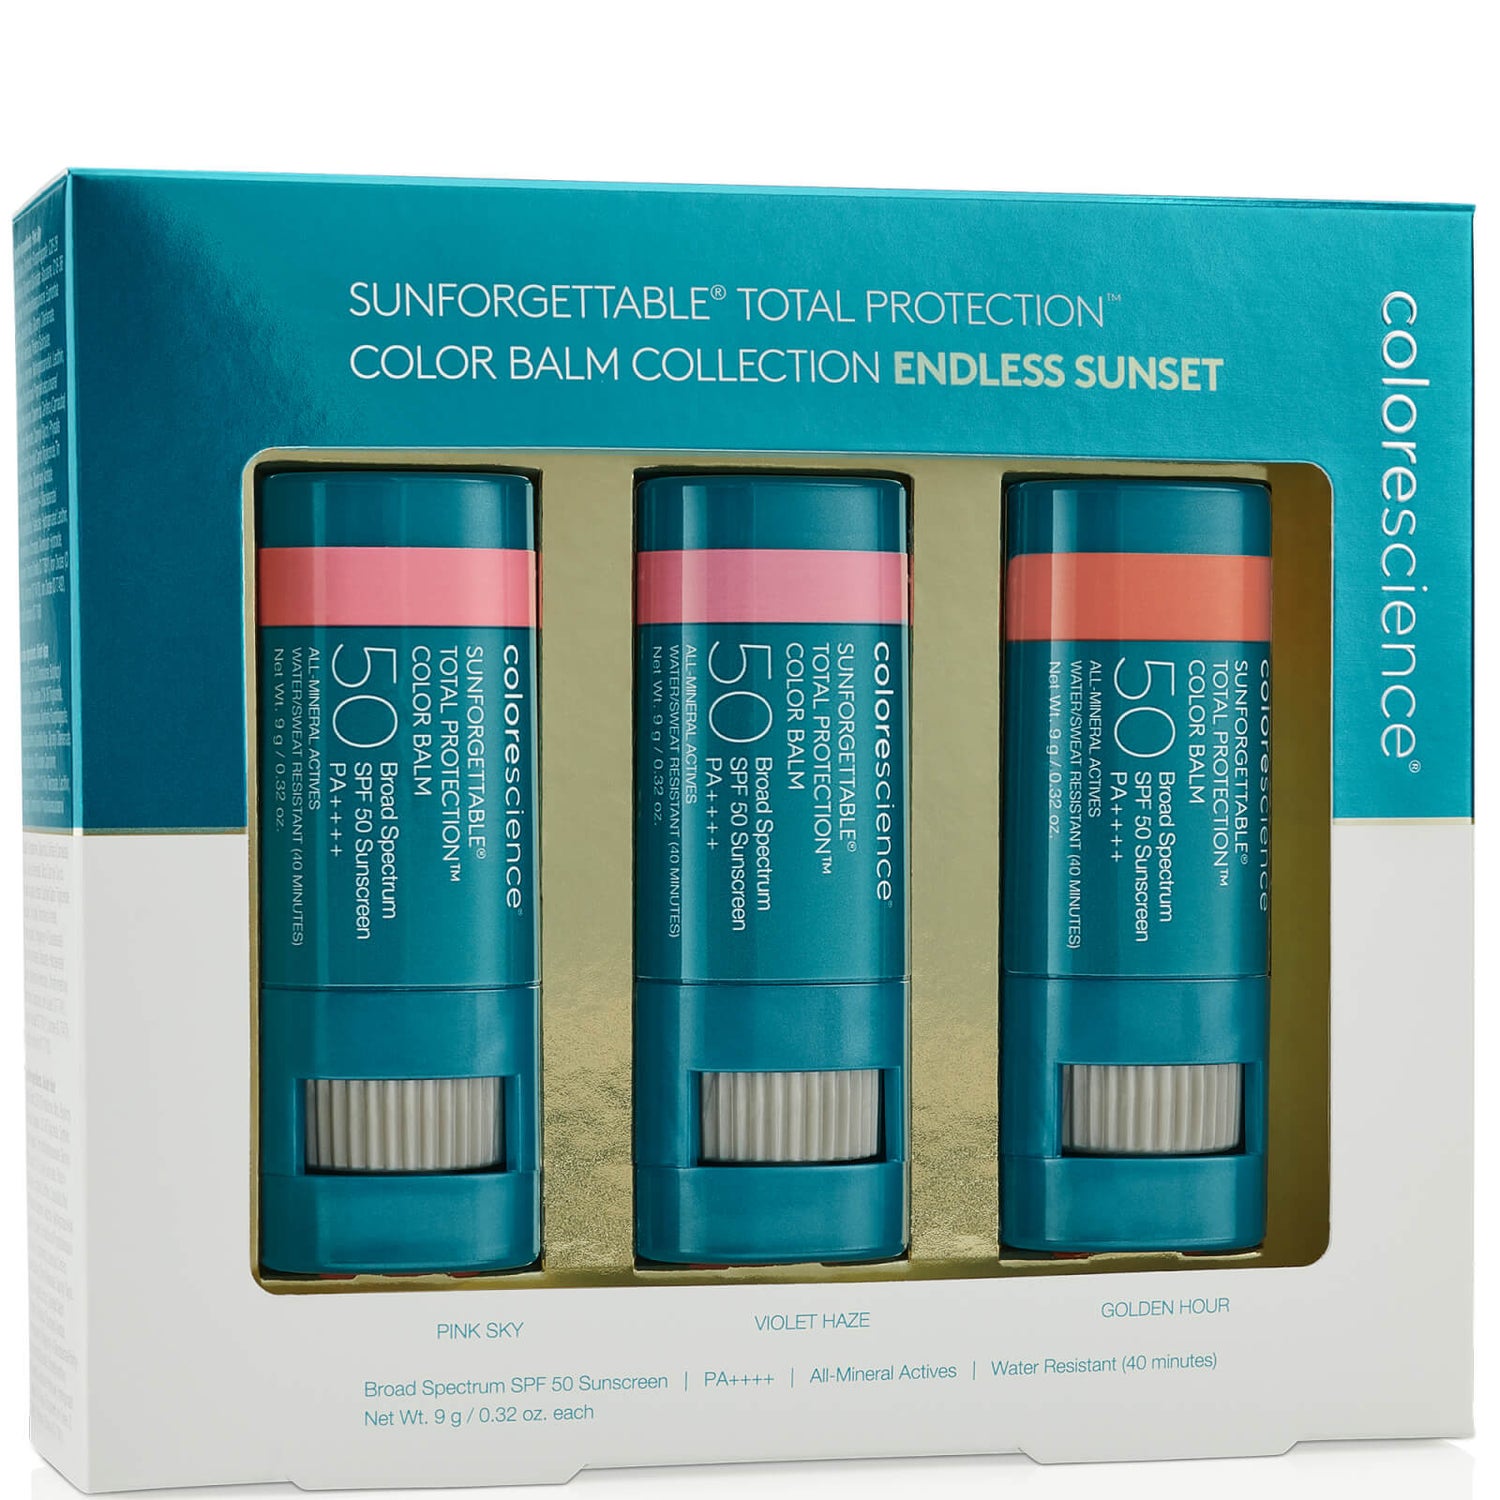 Colorescience Sunforgettable Total Protection Color Balm Collection Endless Sunset